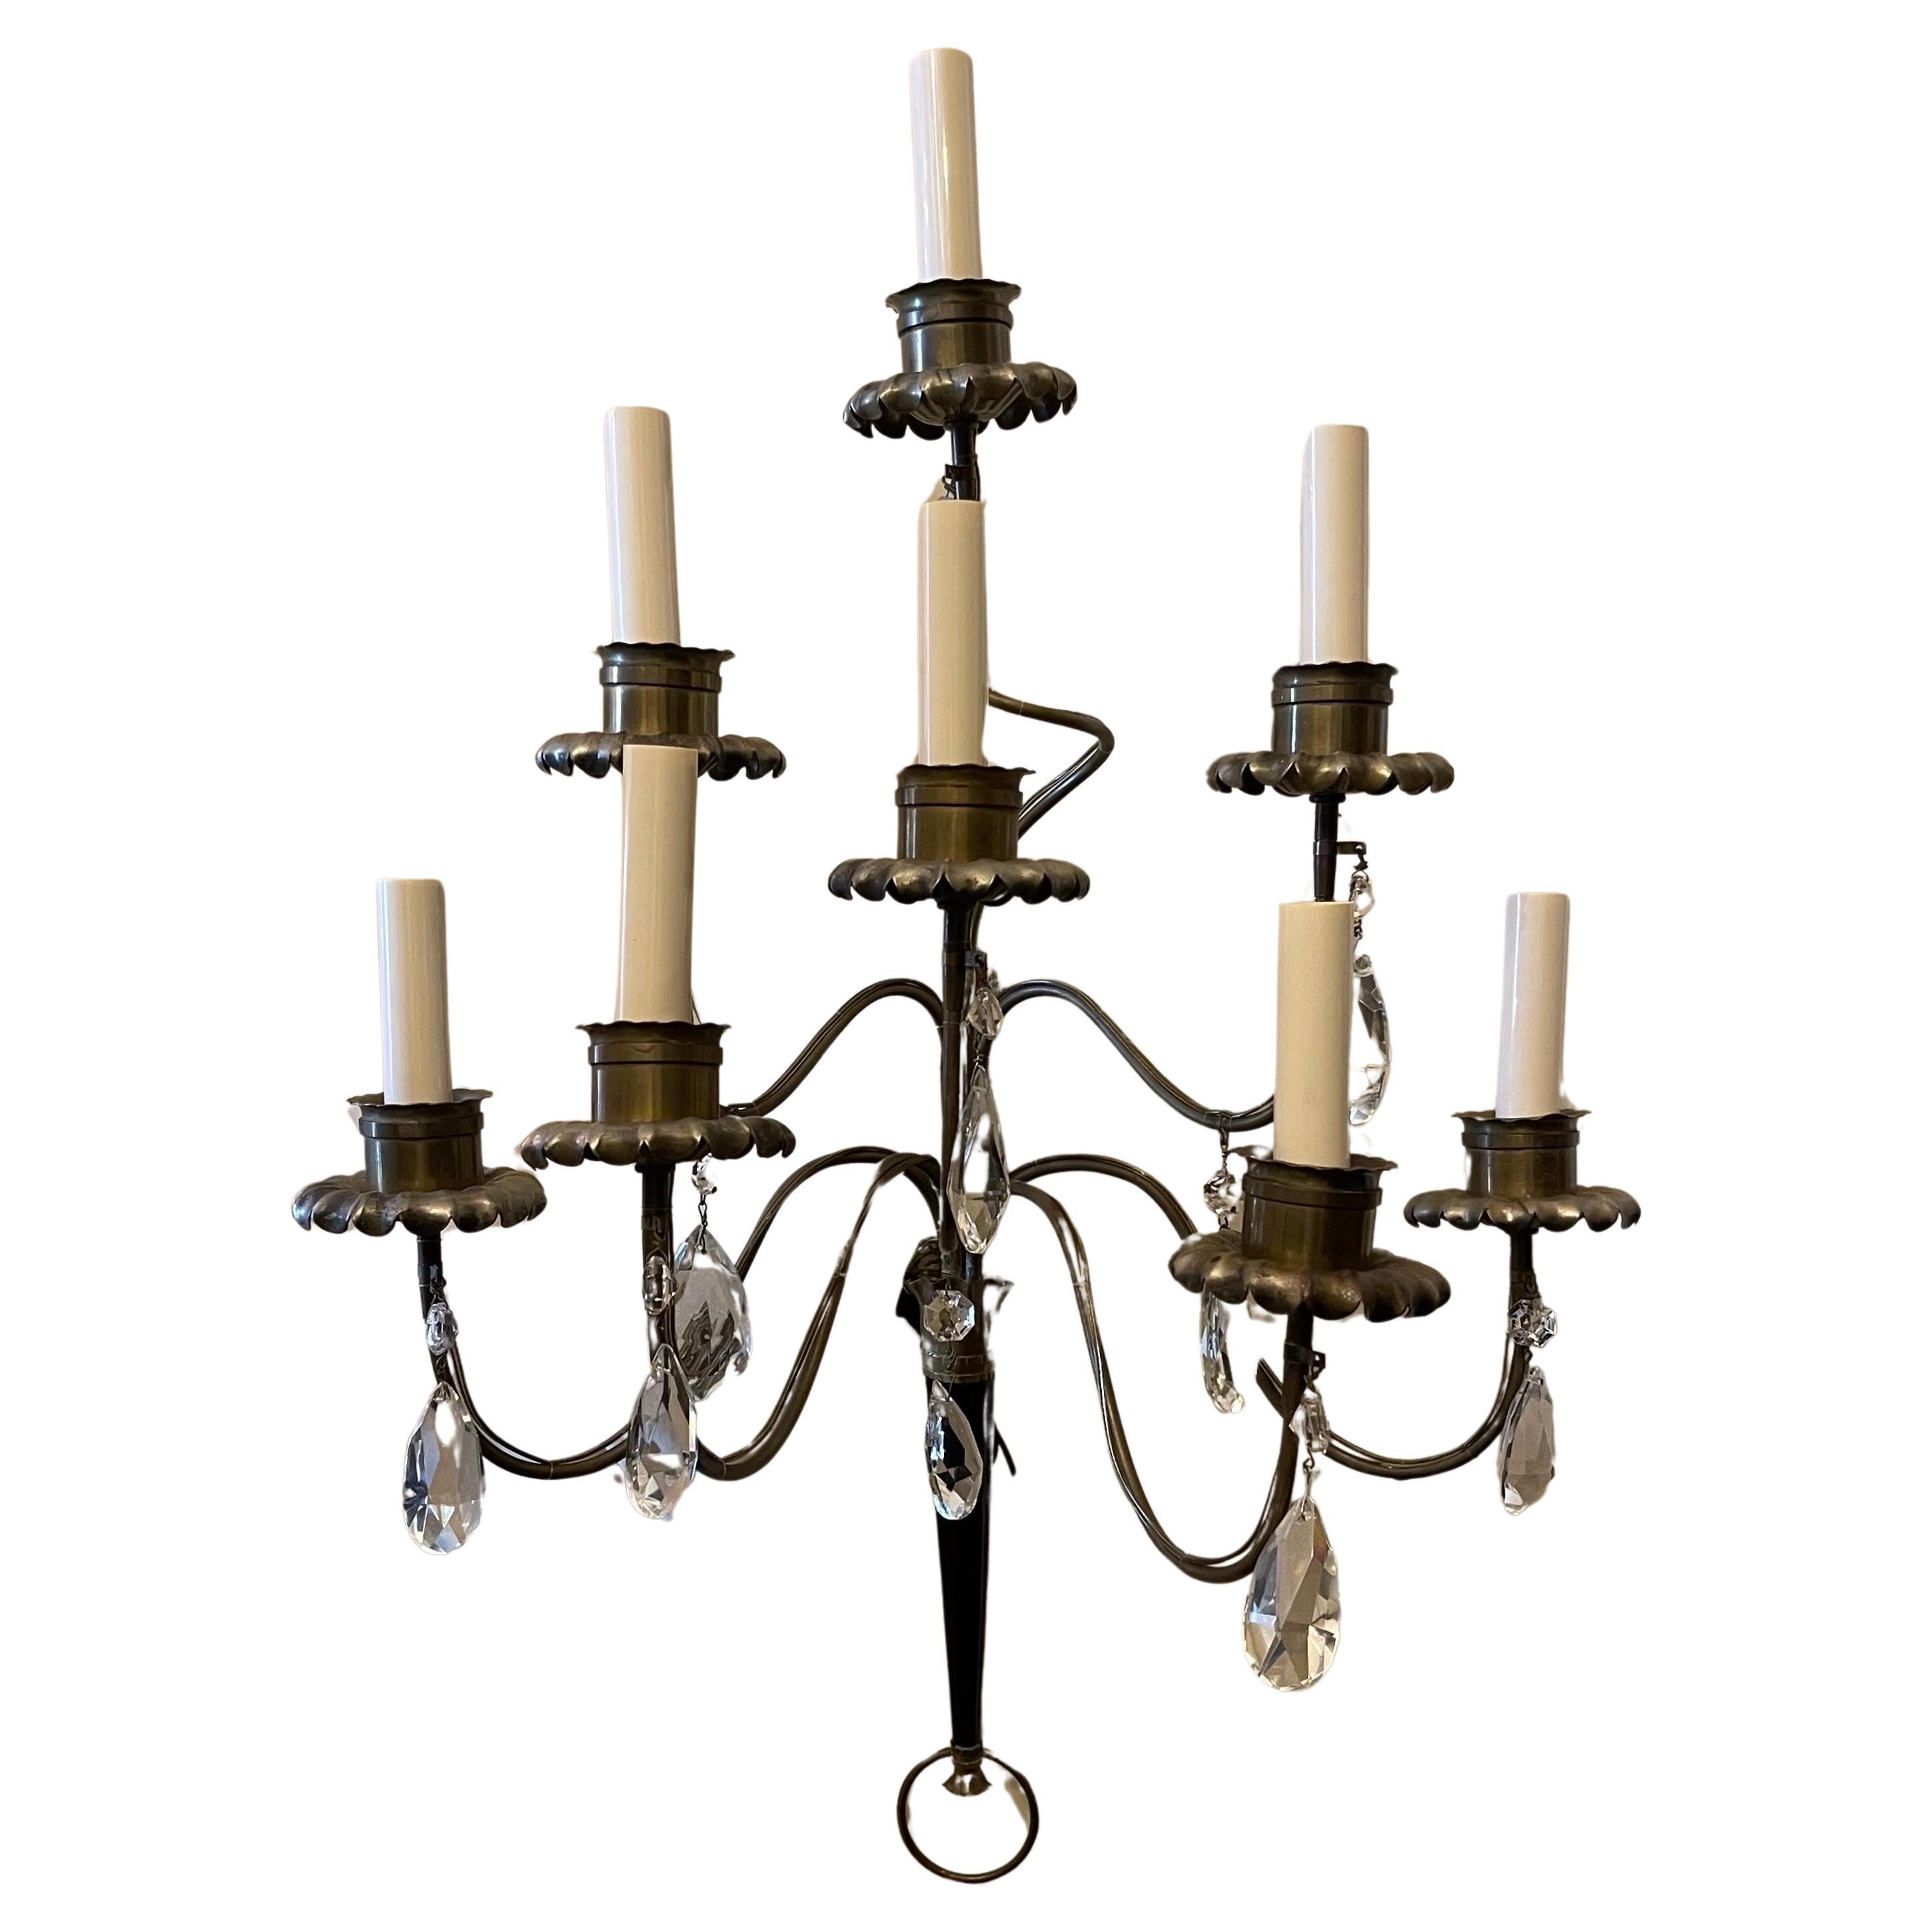 A Wonderful Large Pair Of Brass And Black Patinated 8 Candelabra Light Hollywood Regency Tommi Parzinger Style Wall Sconces, Each Arm Having A Crystal Drop.  